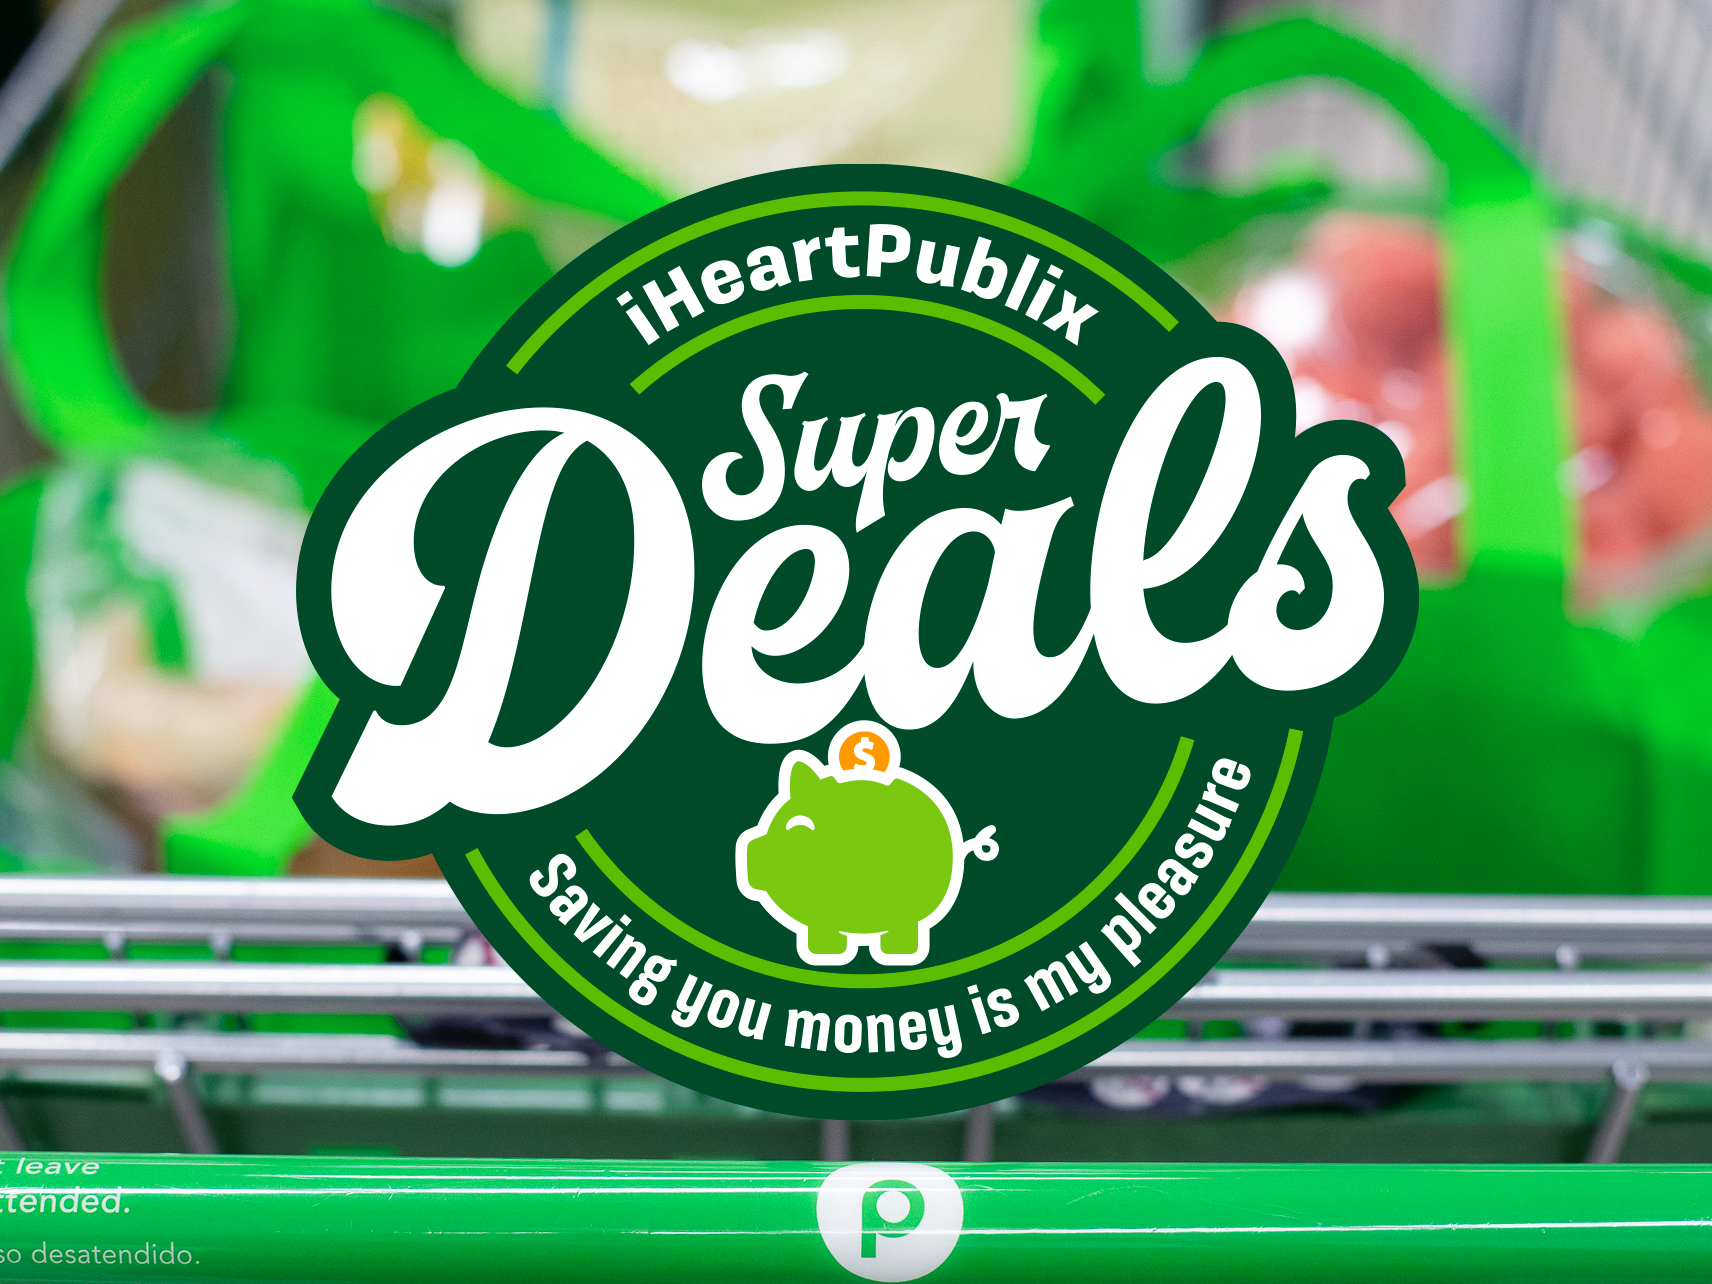 Publix Super Deals Week 11/30 To 12/6 (11/29 To 12/5 For Some)